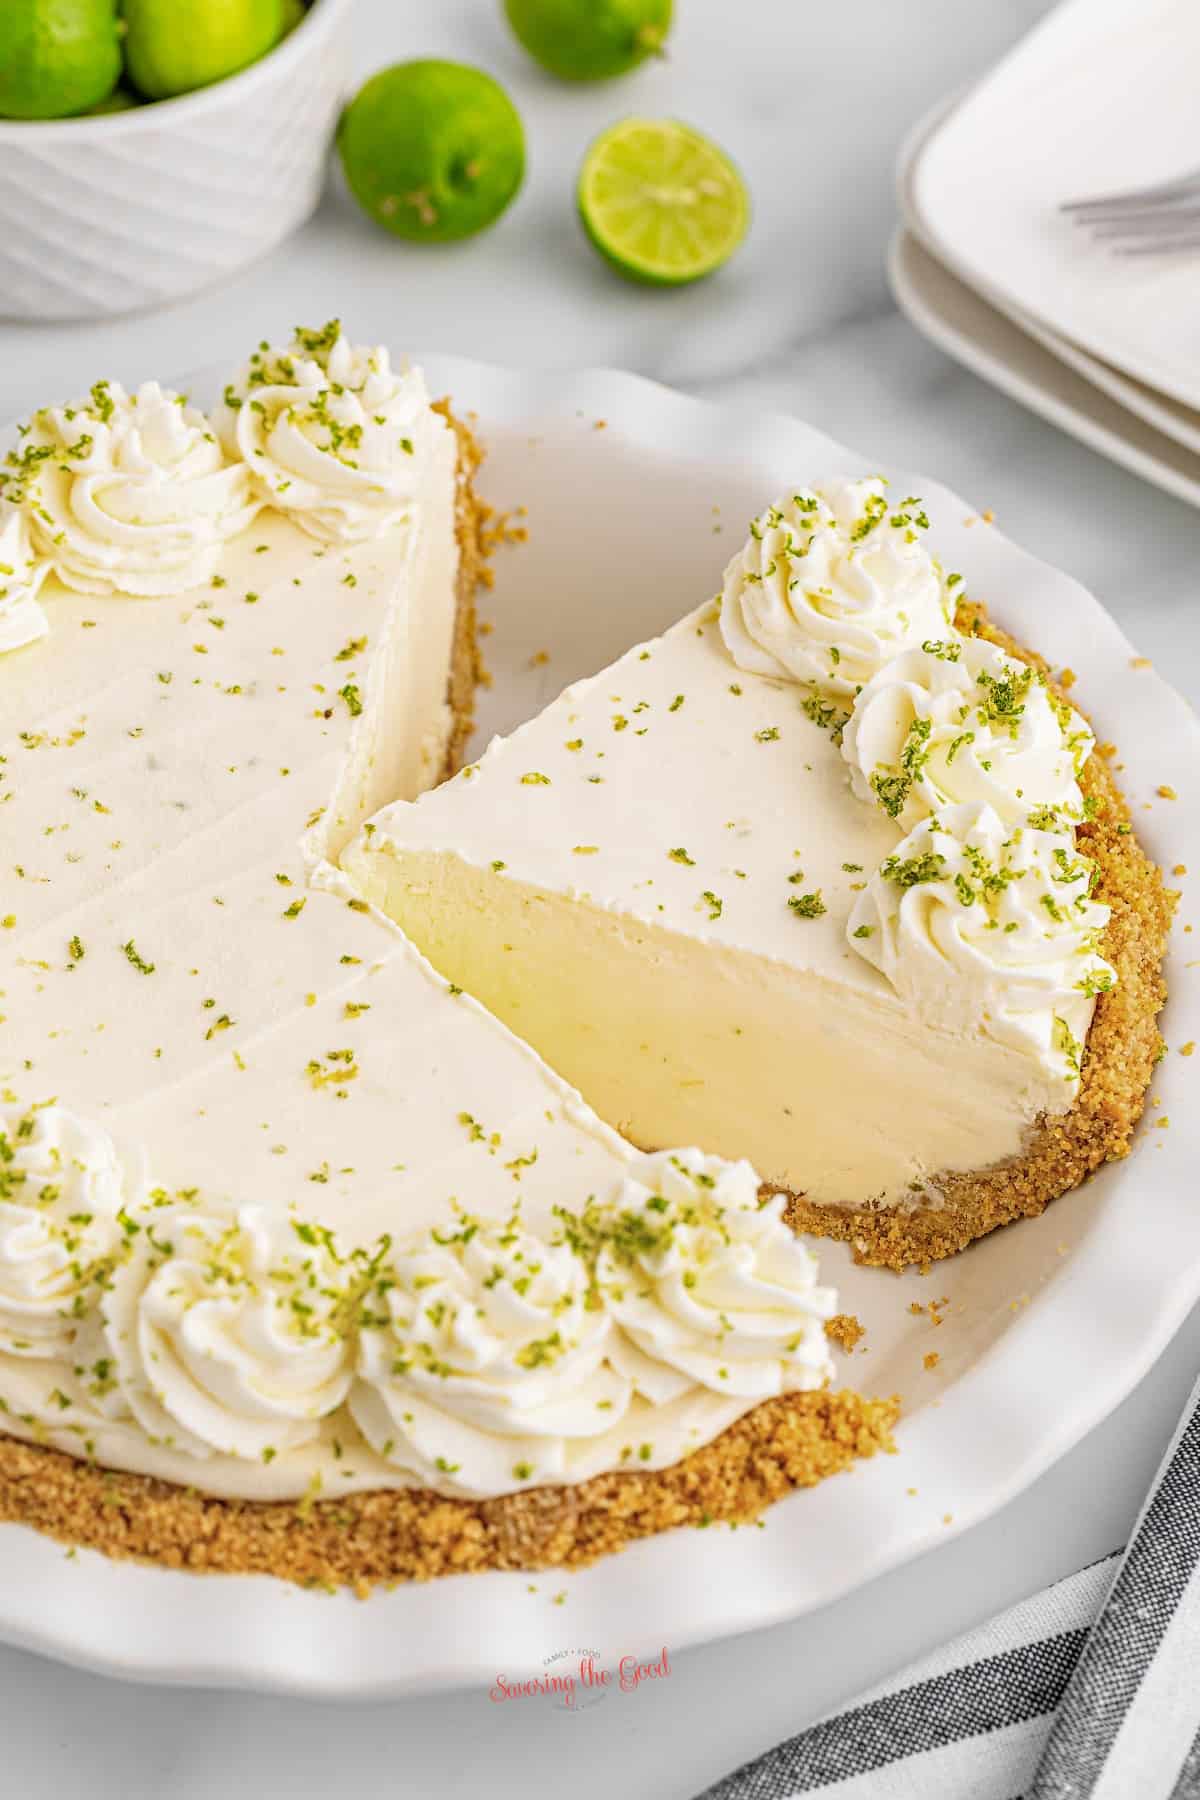 A no bake key lime pie with a slice taken out.